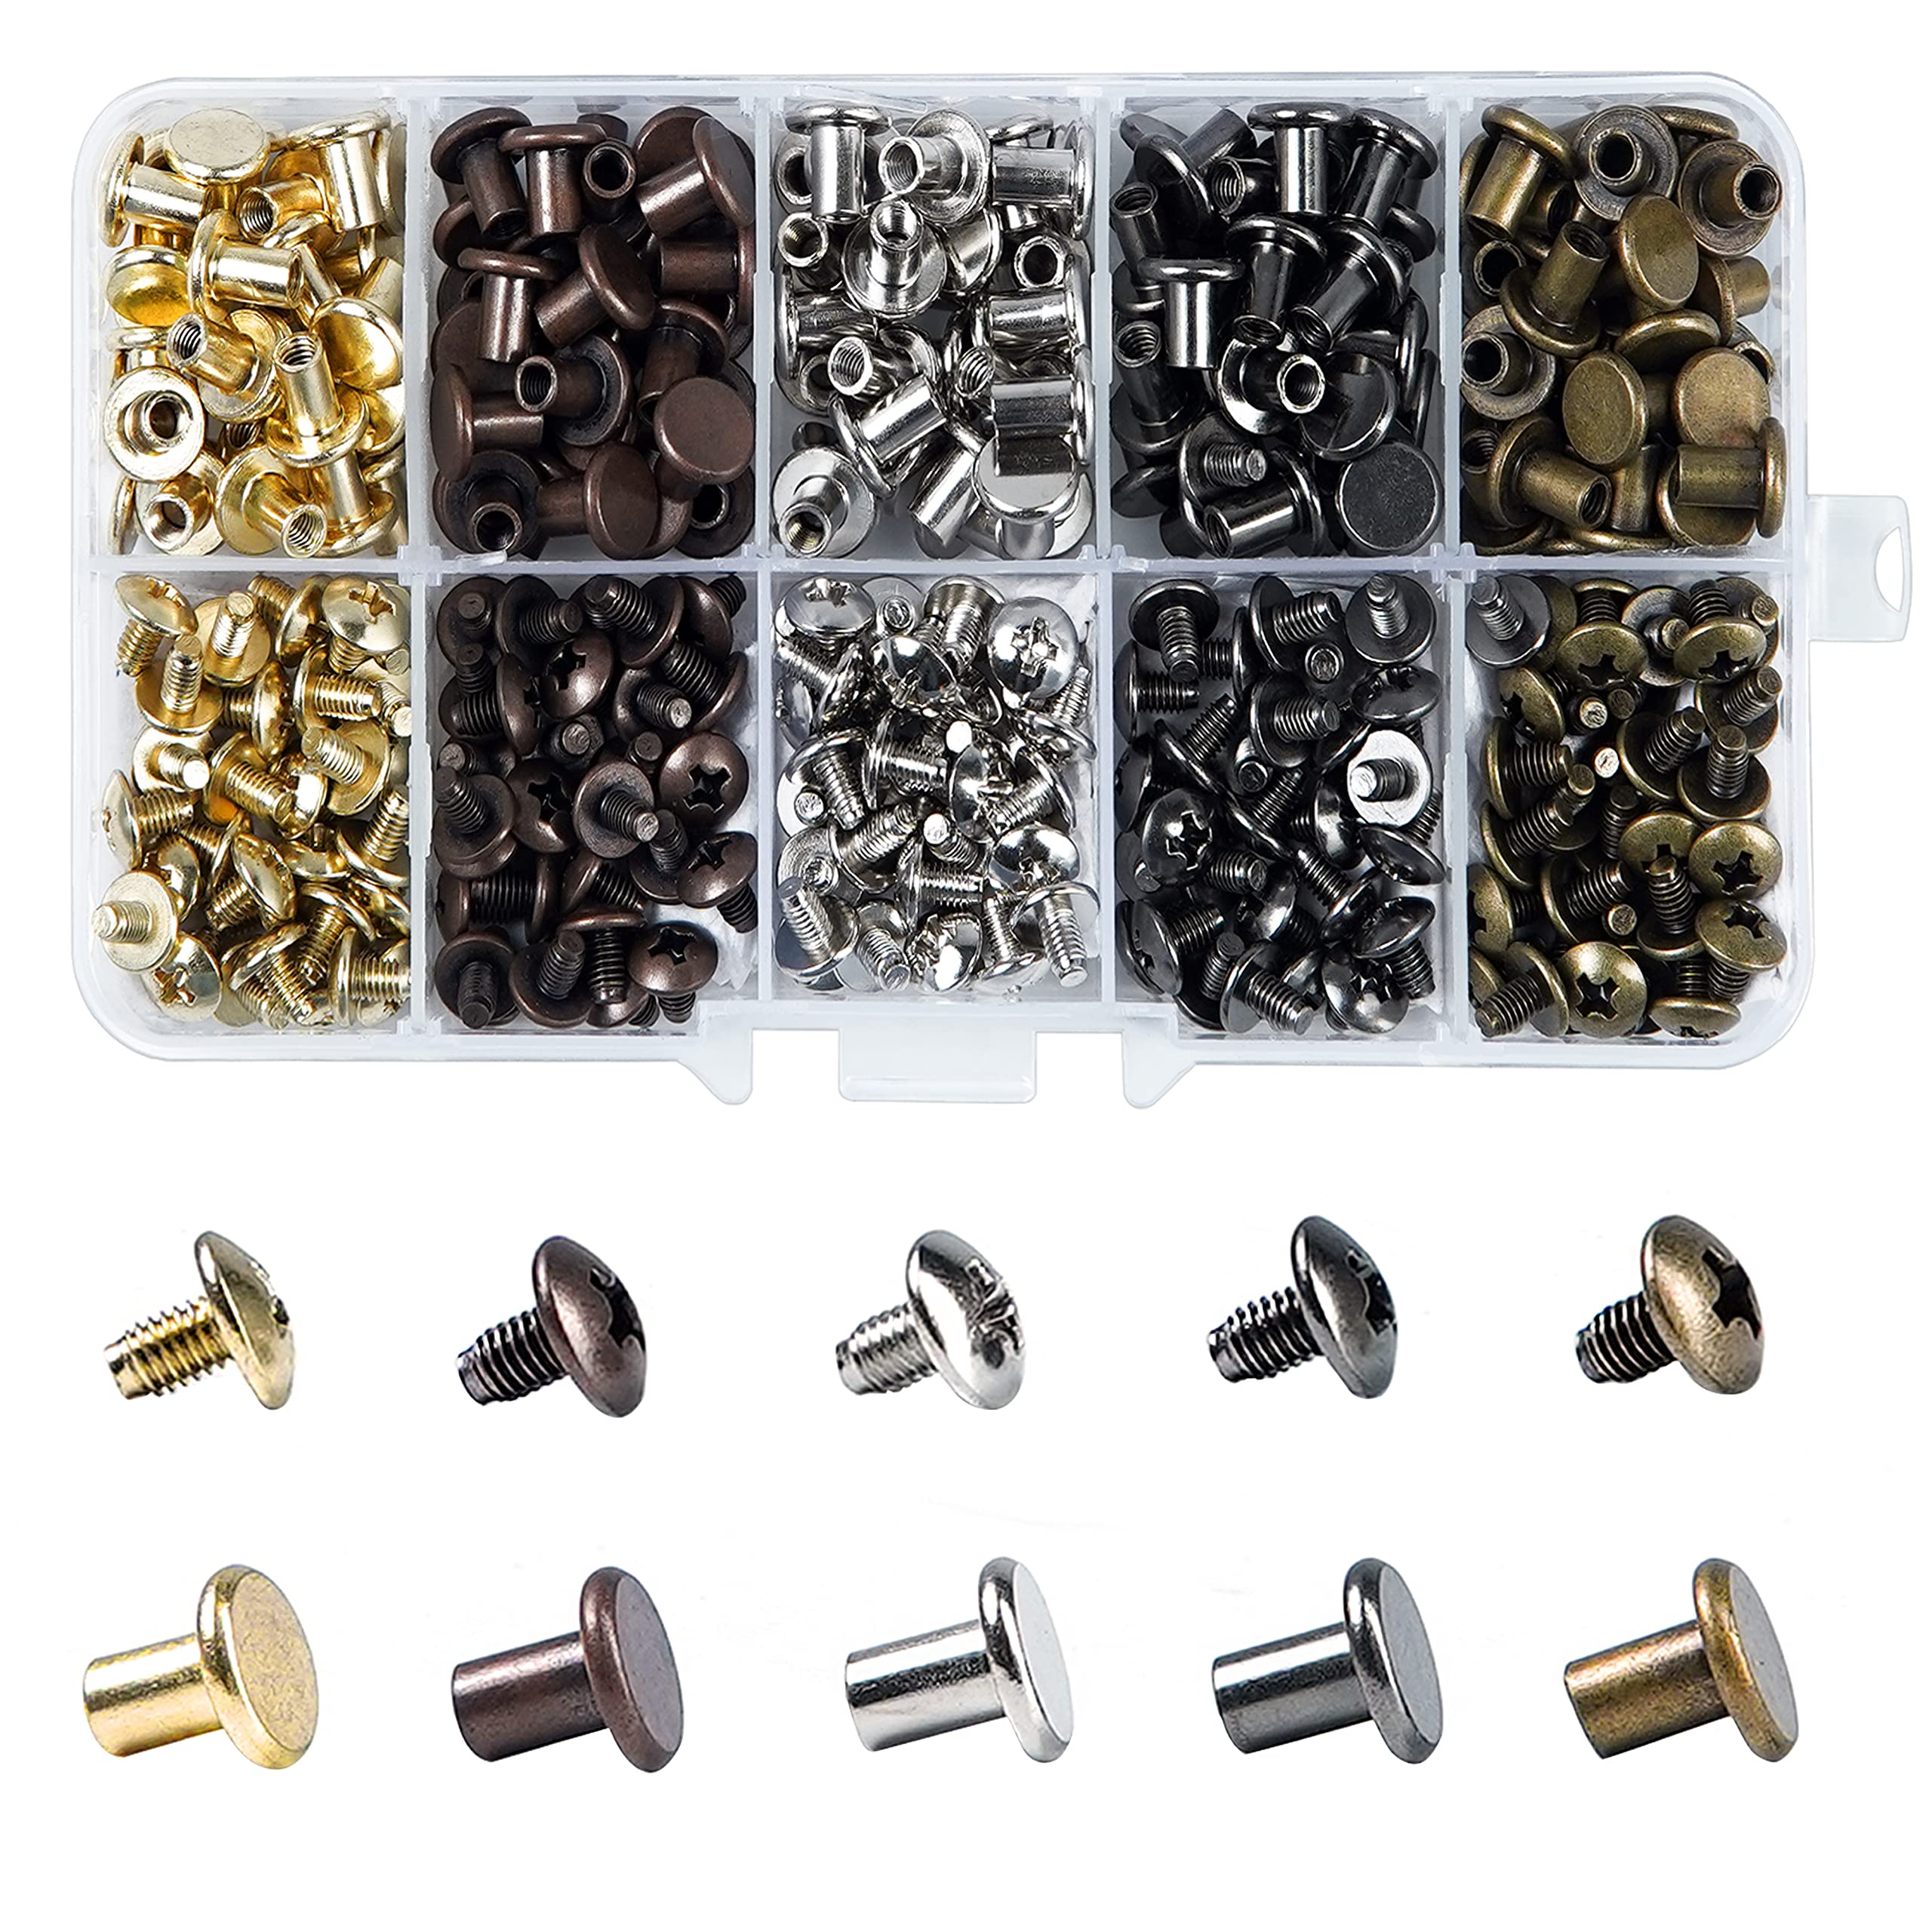 JOZAMER 150 Sets Chicago Screws for Leather 8mm 6mm Screw Rivets in 5  Colors (Gold Bronze Silver Antique Copper & Gun Metal) for DIY Handbags  Belts Binding Photo Albums & Shoes 6 mm (15/64 inches)